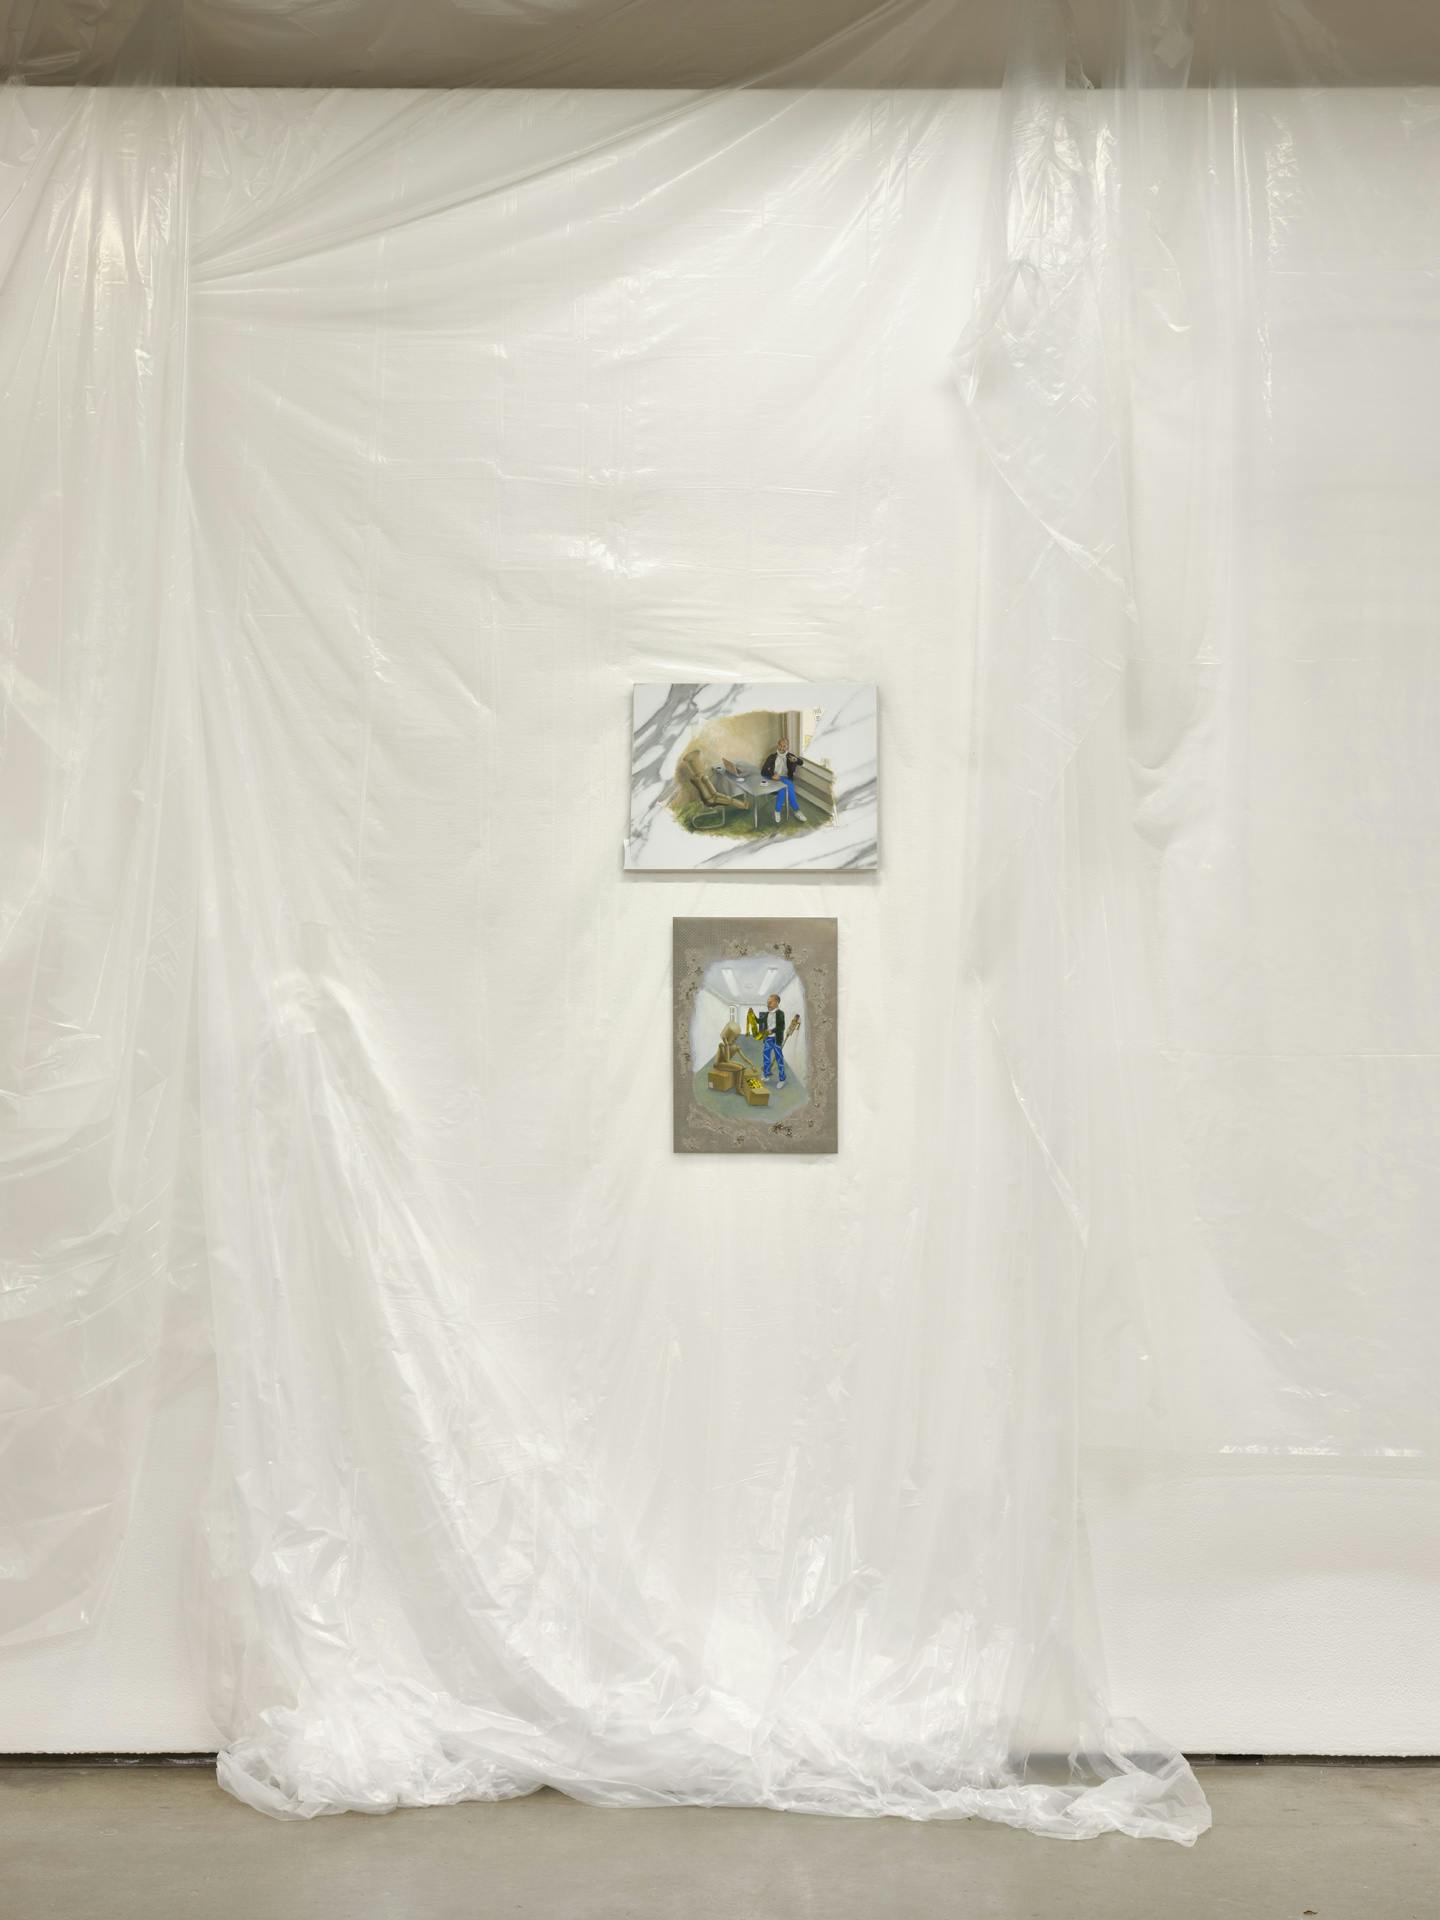 Two small paintings hang stacked on a gallery wall draped with translucent plastic sheets. The painting on the top is painted on a faux-marble tile, the one on the bottom on a vertical sheet of metal.